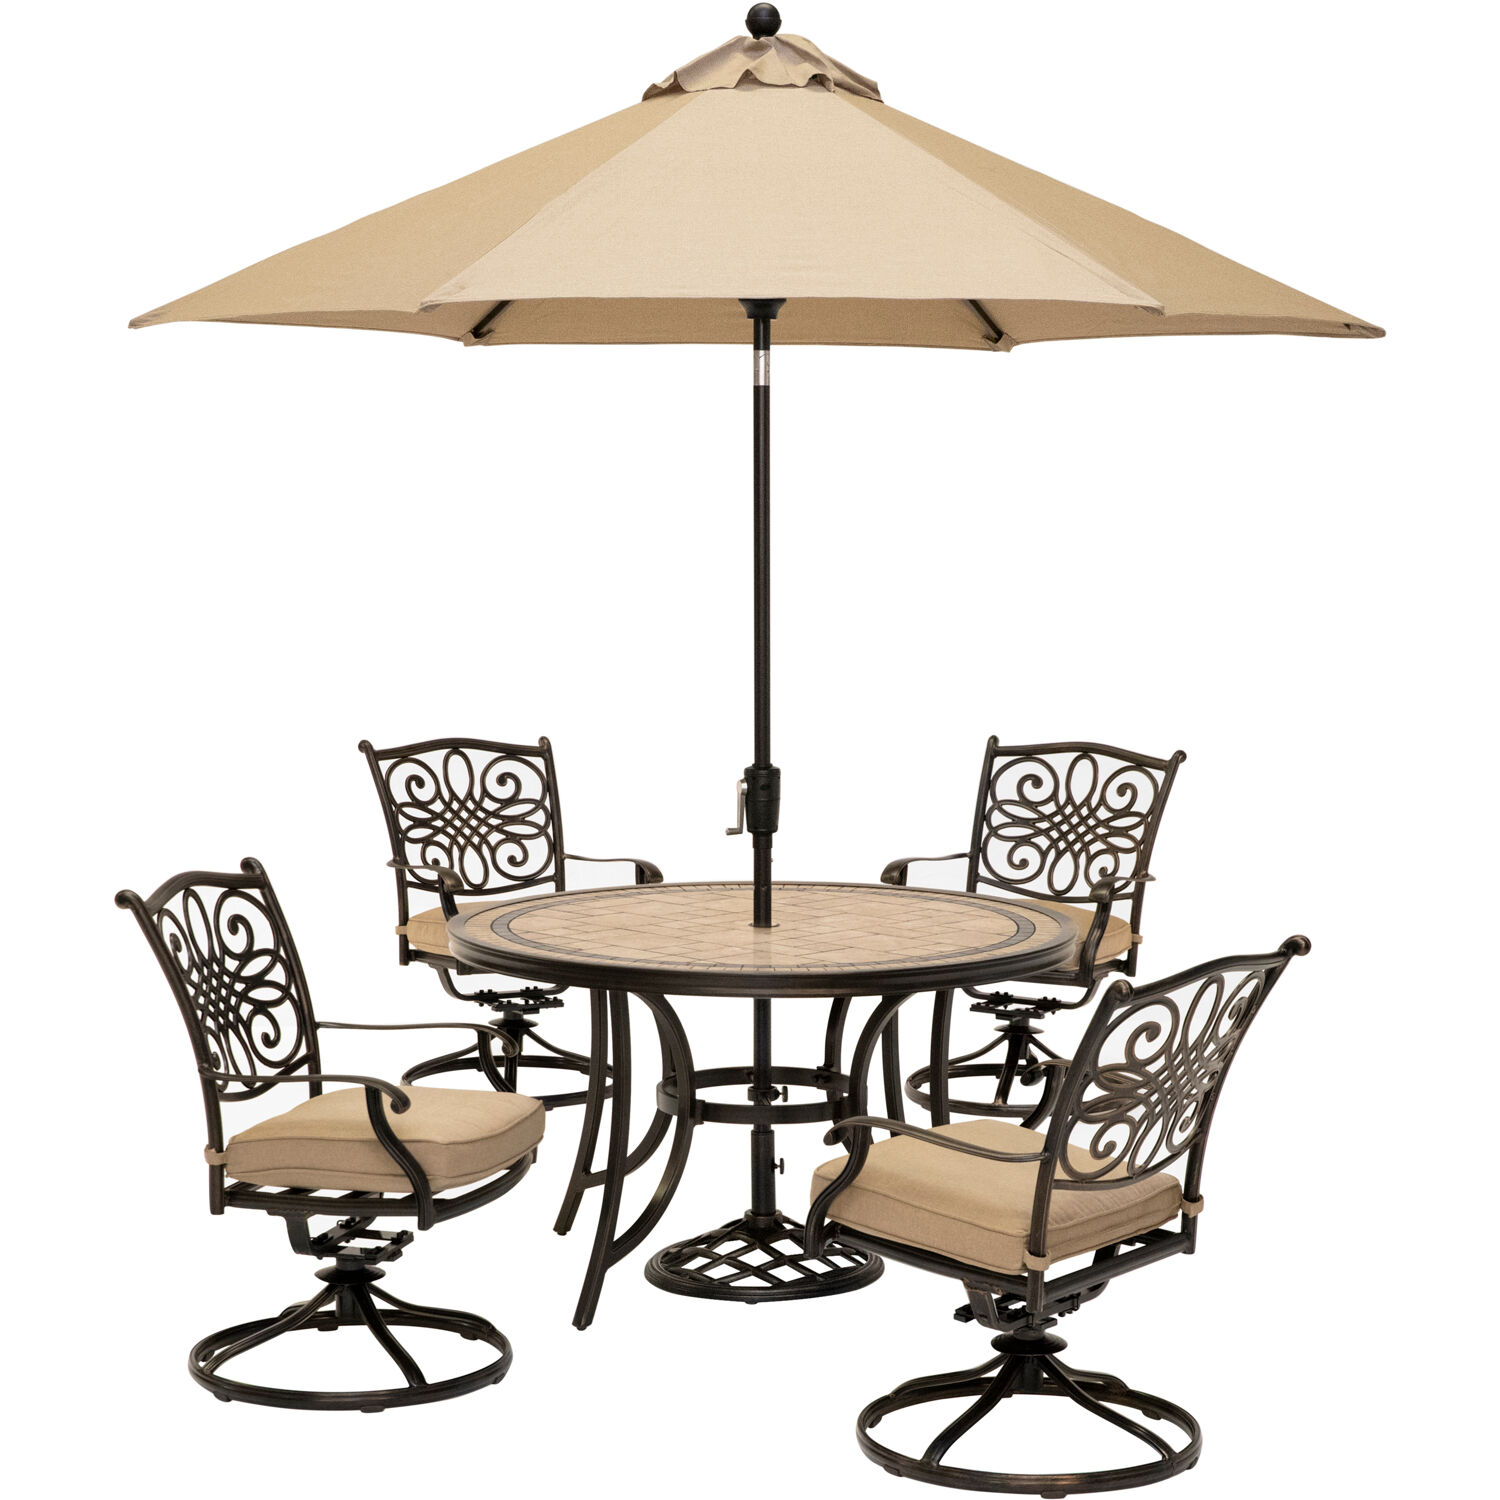 Hanover Monaco 5-Piece Outdoor Furniture Patio Dining Set, 4 Cushioned Swivel Rocker Chairs, 51" Round Tile-Top Table, Umbrella, and Base Brushed - image 1 of 9